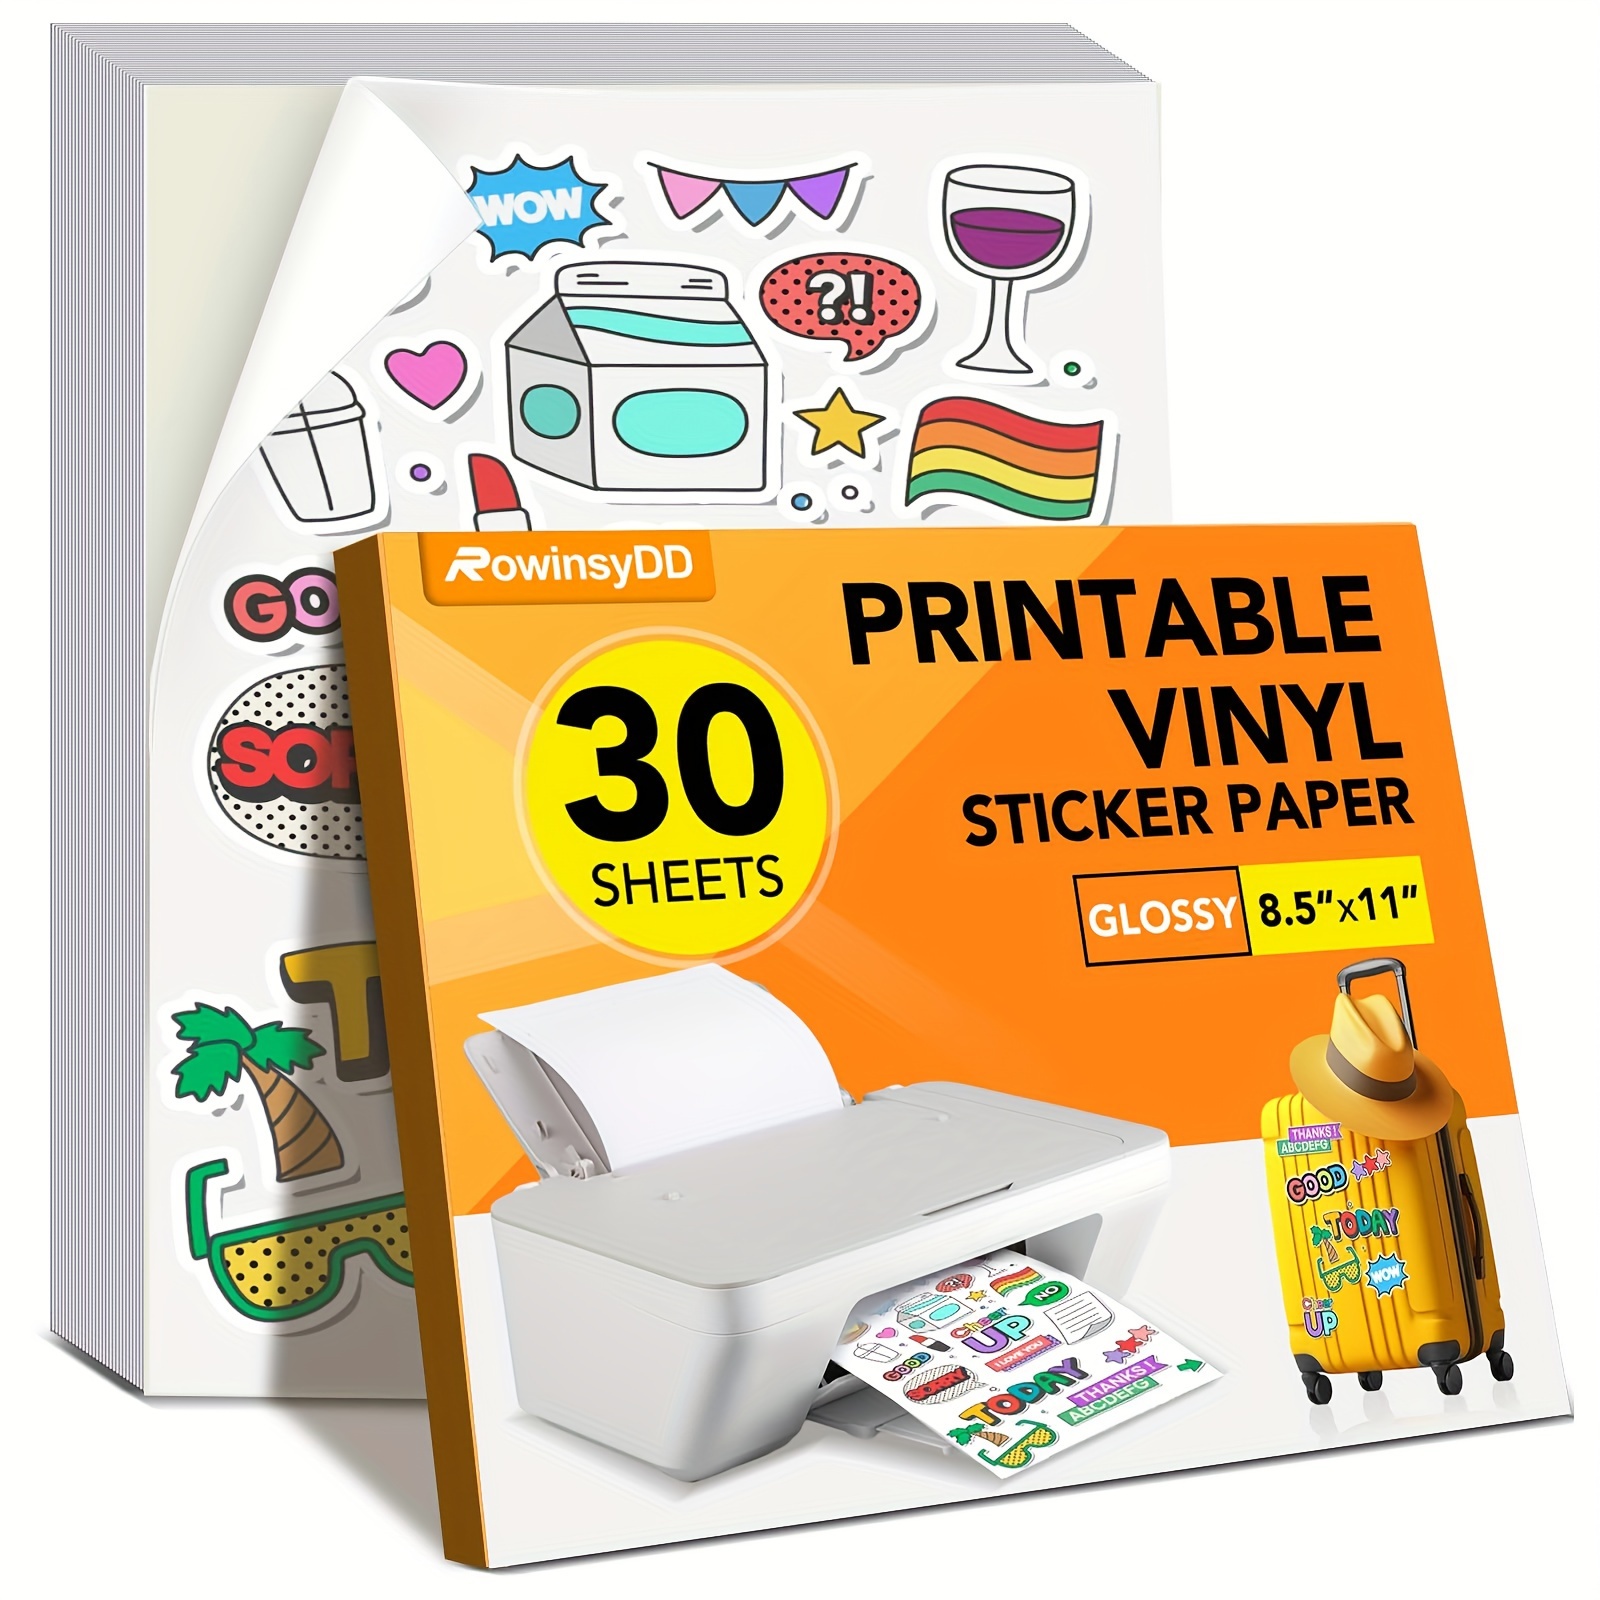 

30-piece Glossy White Printable Vinyl Stickers, Quick-dry Inkjet & Laser Compatible, 8.5"x11", Tear-resistant For Everyday Office Use